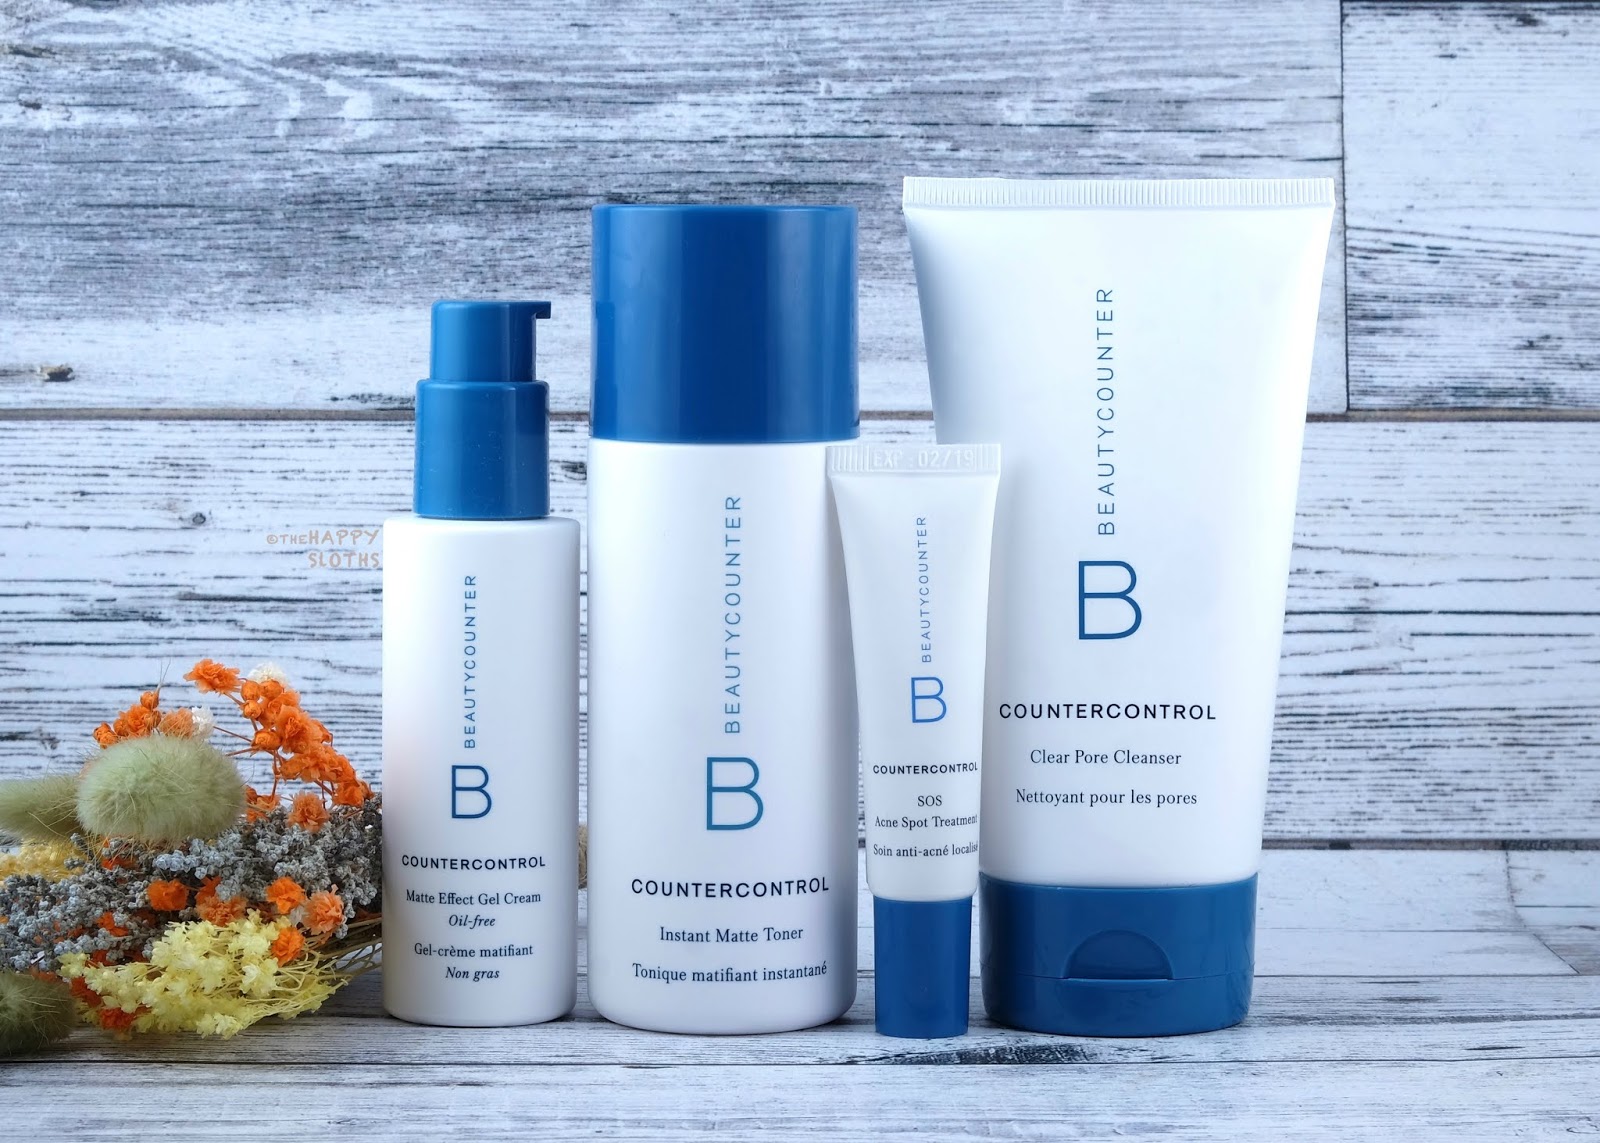 Beautycounter | Countercontrol Collection for Oily & Blemish-Prone Skin: Review